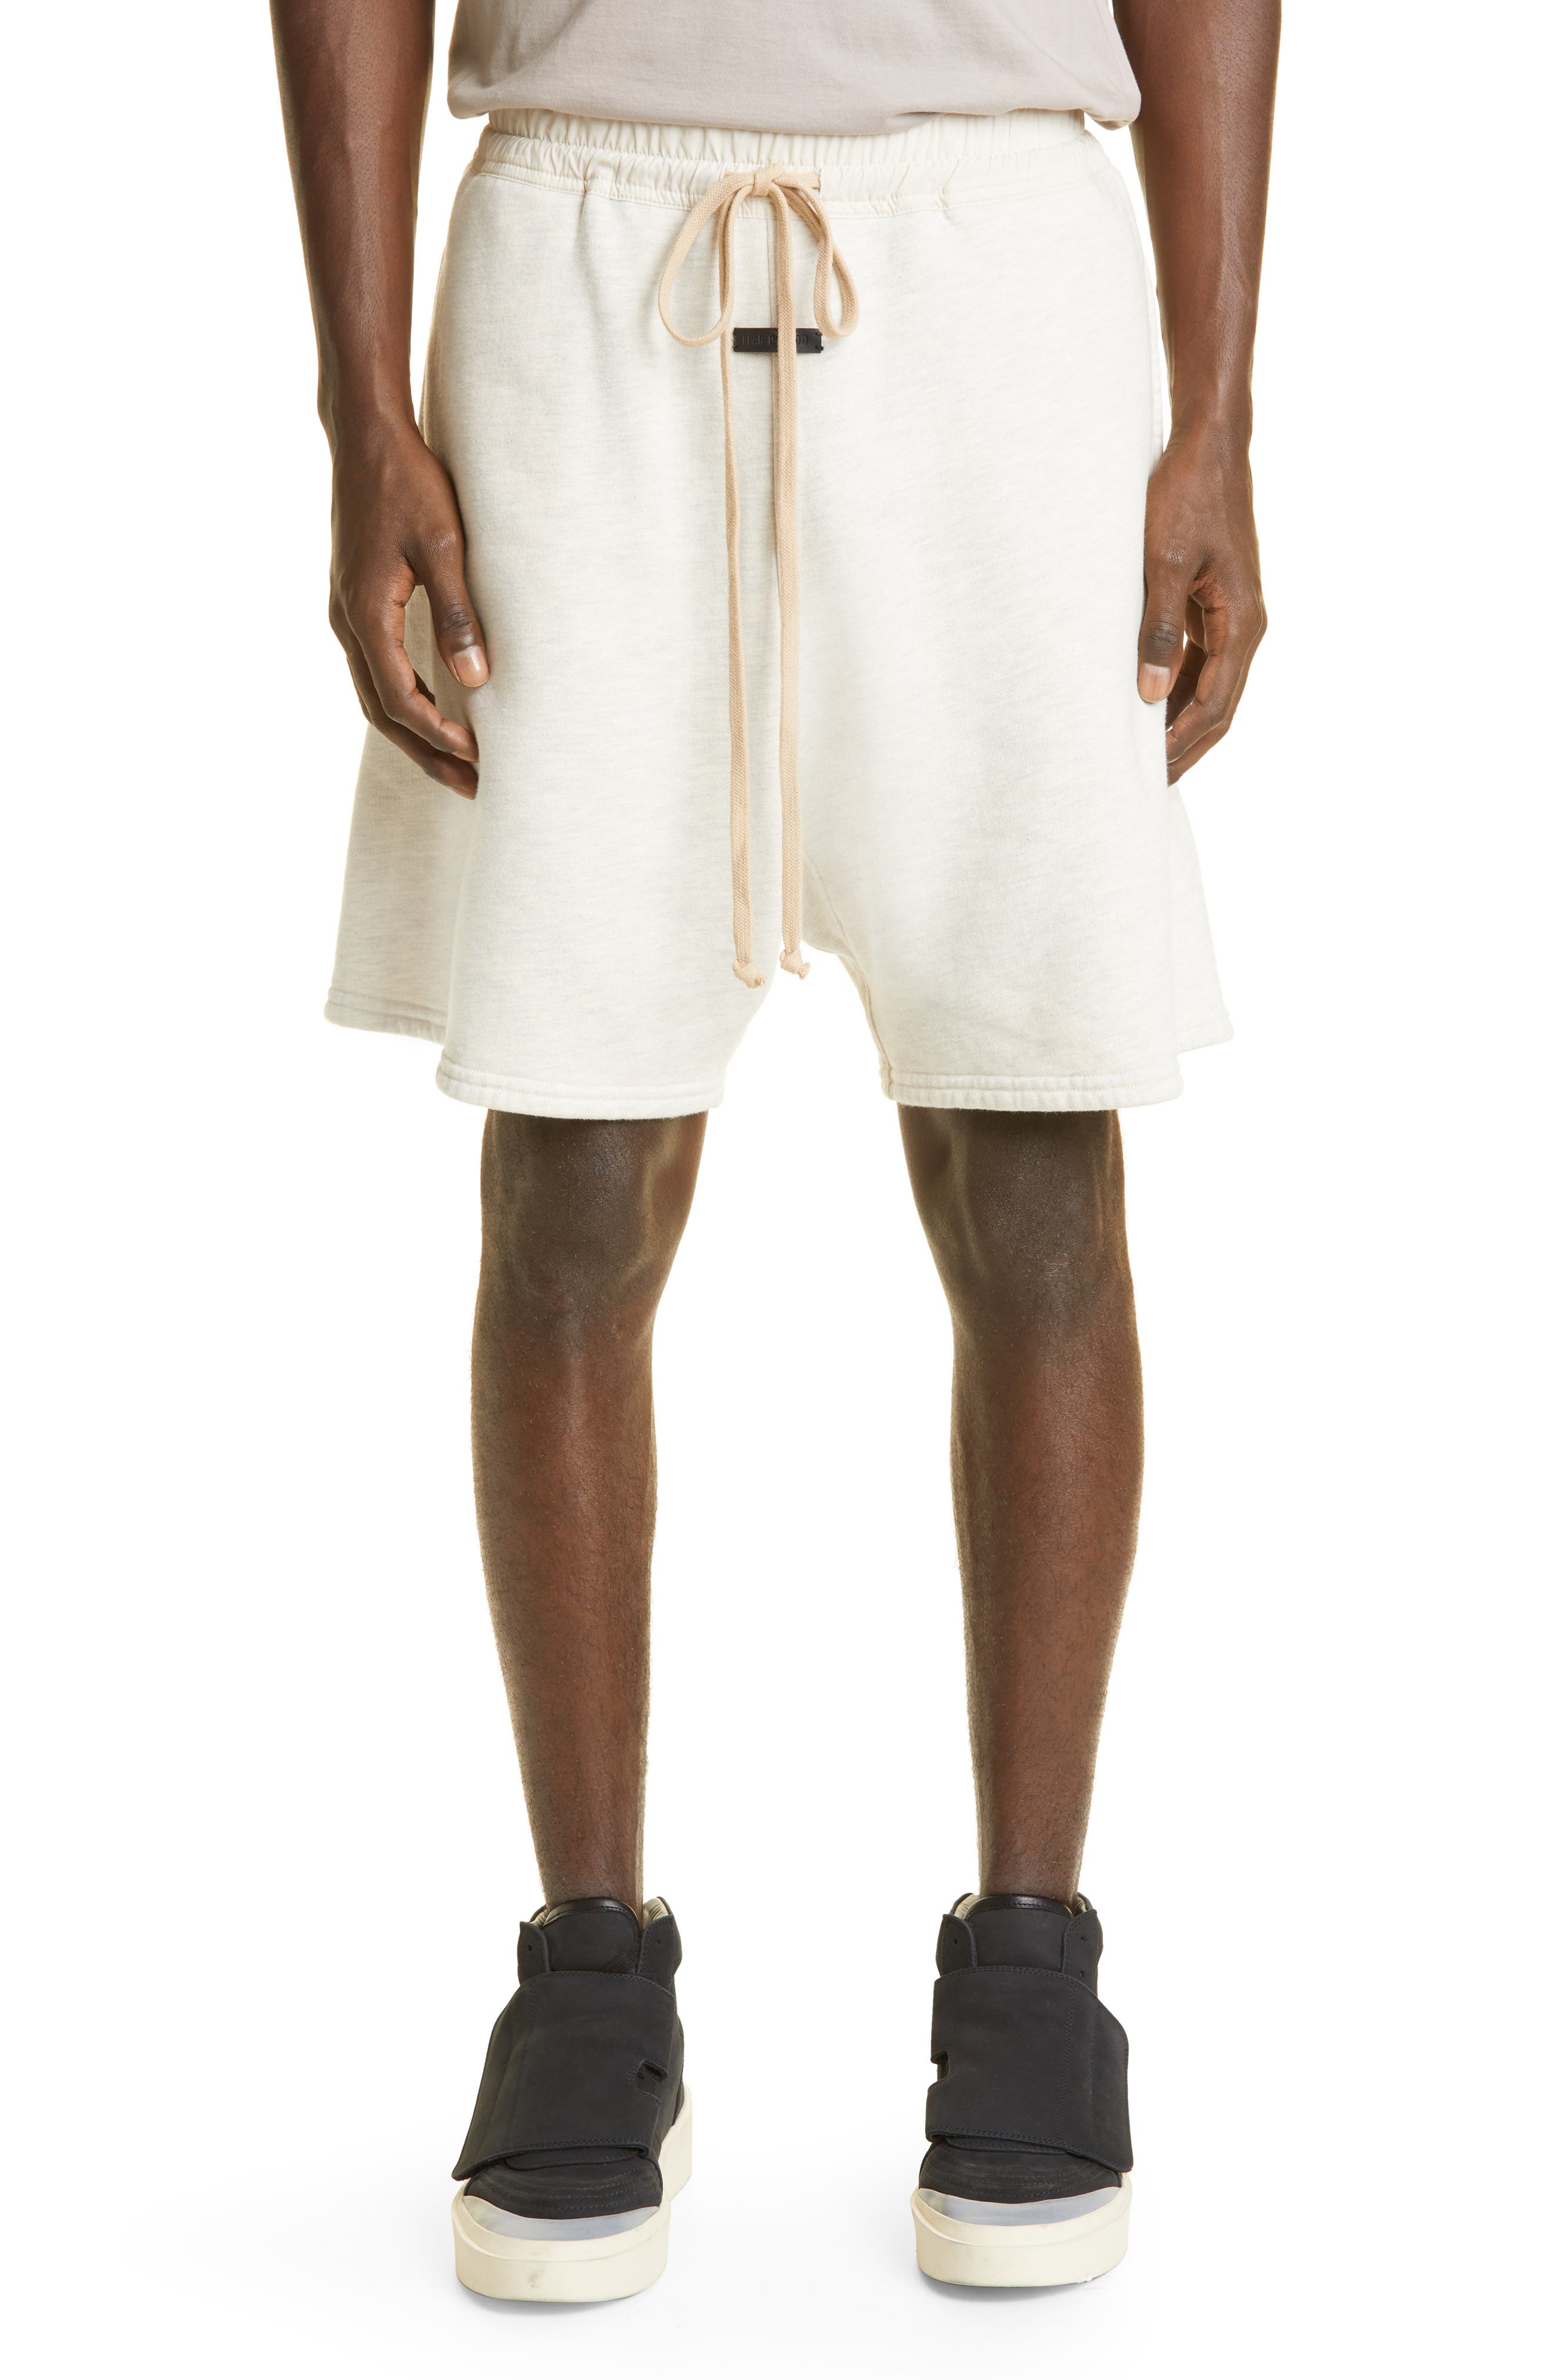 Fear of God The Vintage Cotton Sweat Shorts in Cream Heather at Nordstrom, Size Medium